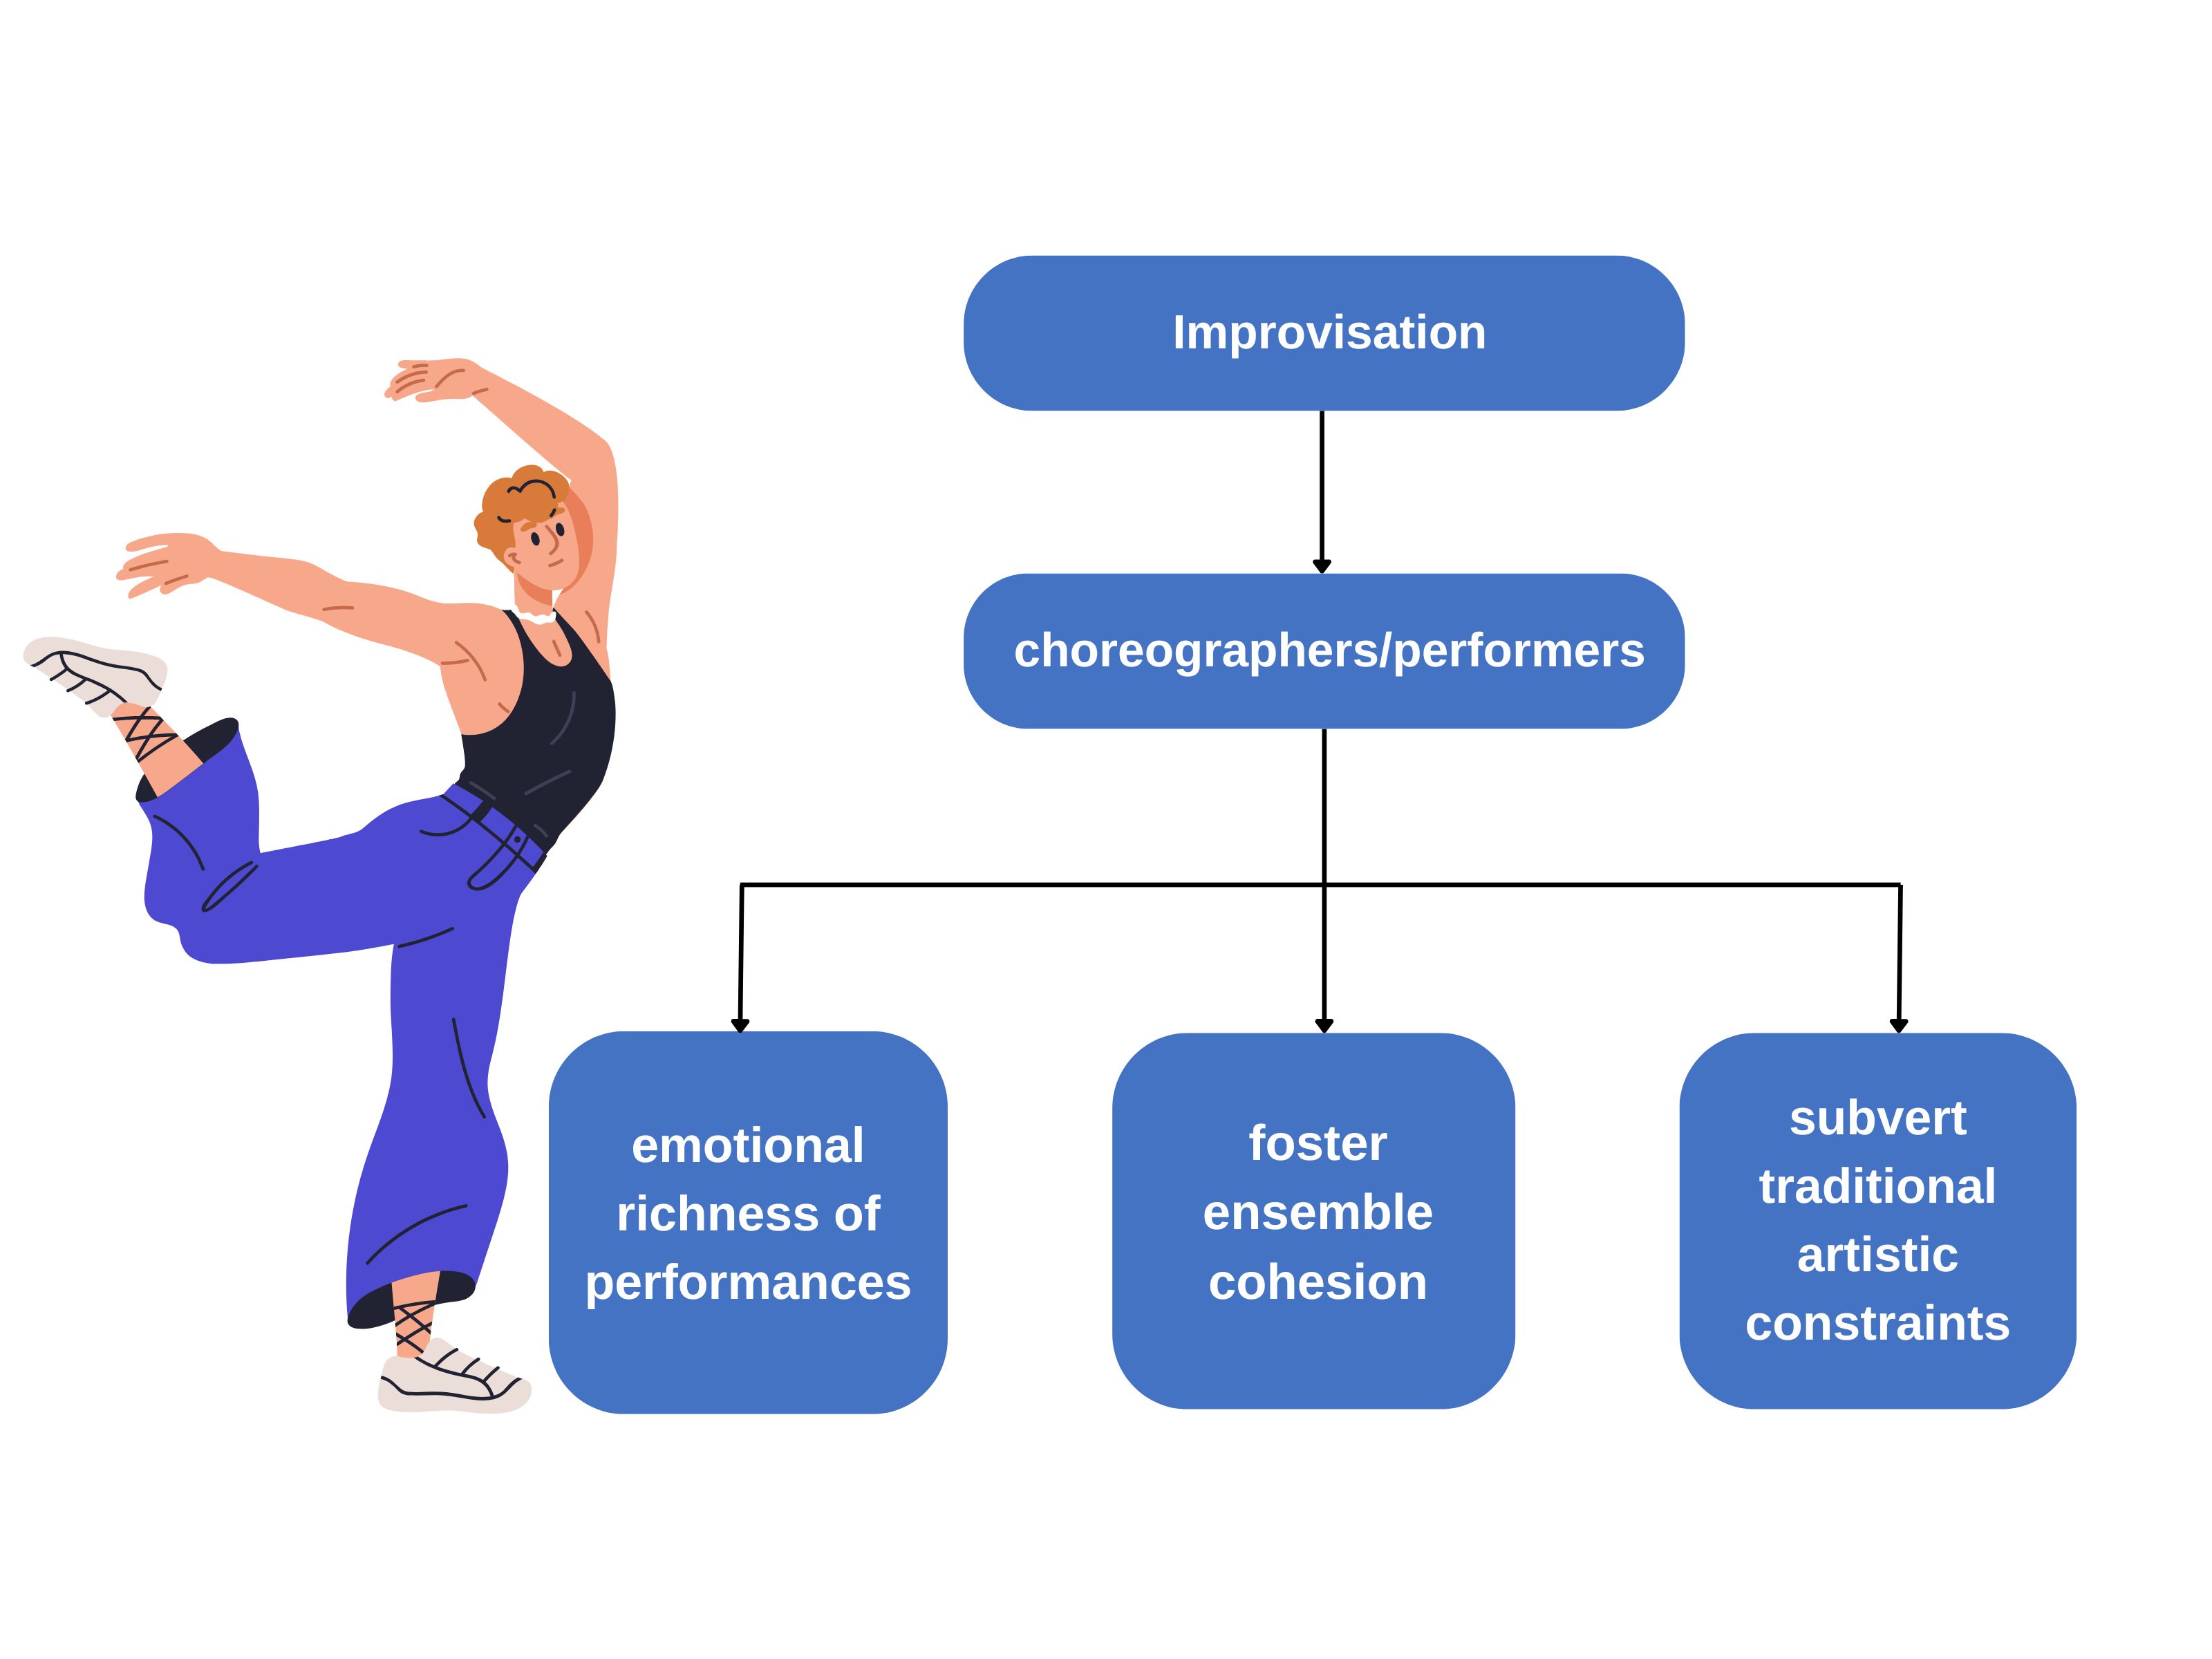 Embracing Uncertainty: The Central Role of Improvisation in Contemporary Dance Artistry